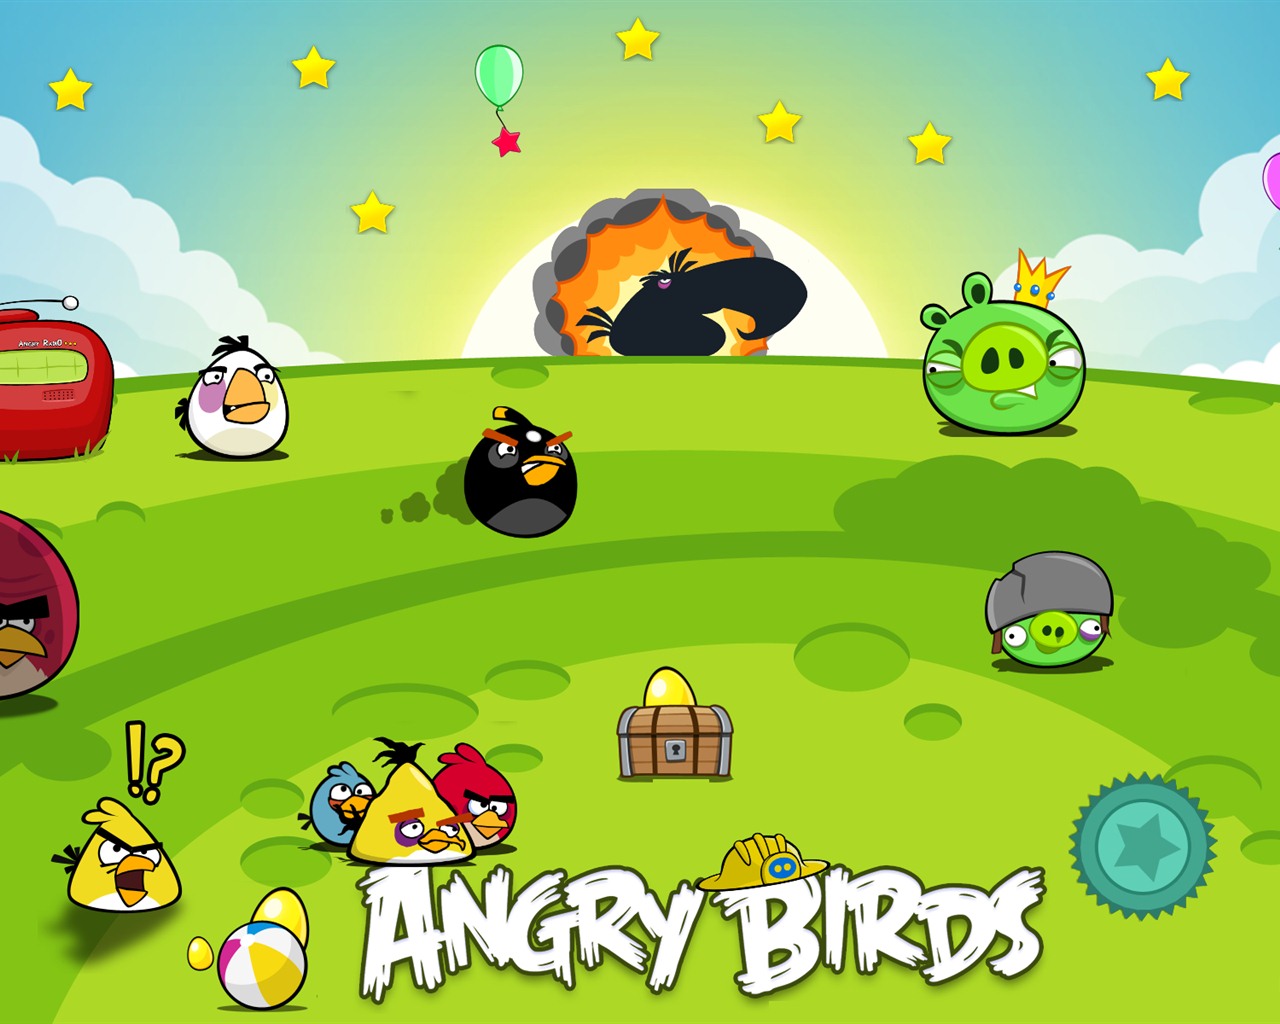 Angry Birds Game Wallpapers #12 - 1280x1024